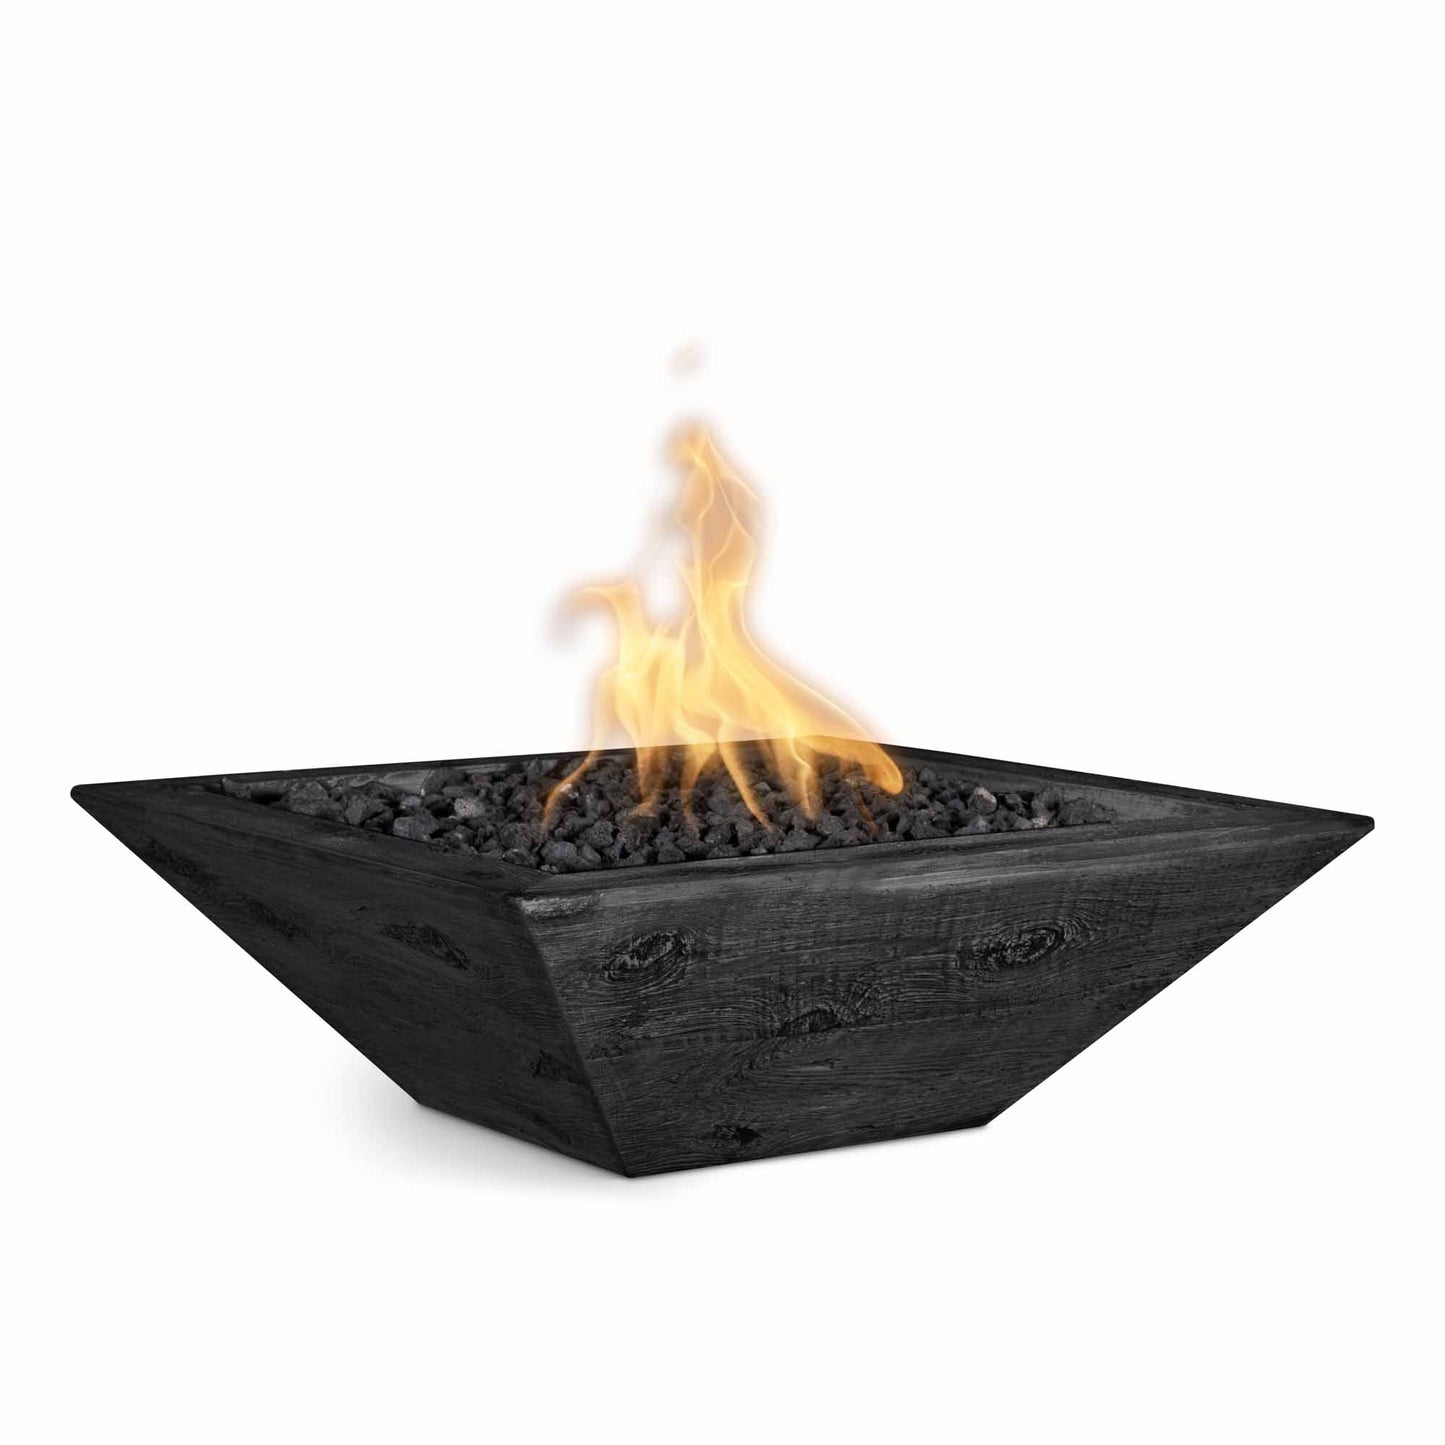 The Outdoor Plus Maya Wood Grain Concrete Fire Bowl + Free Cover